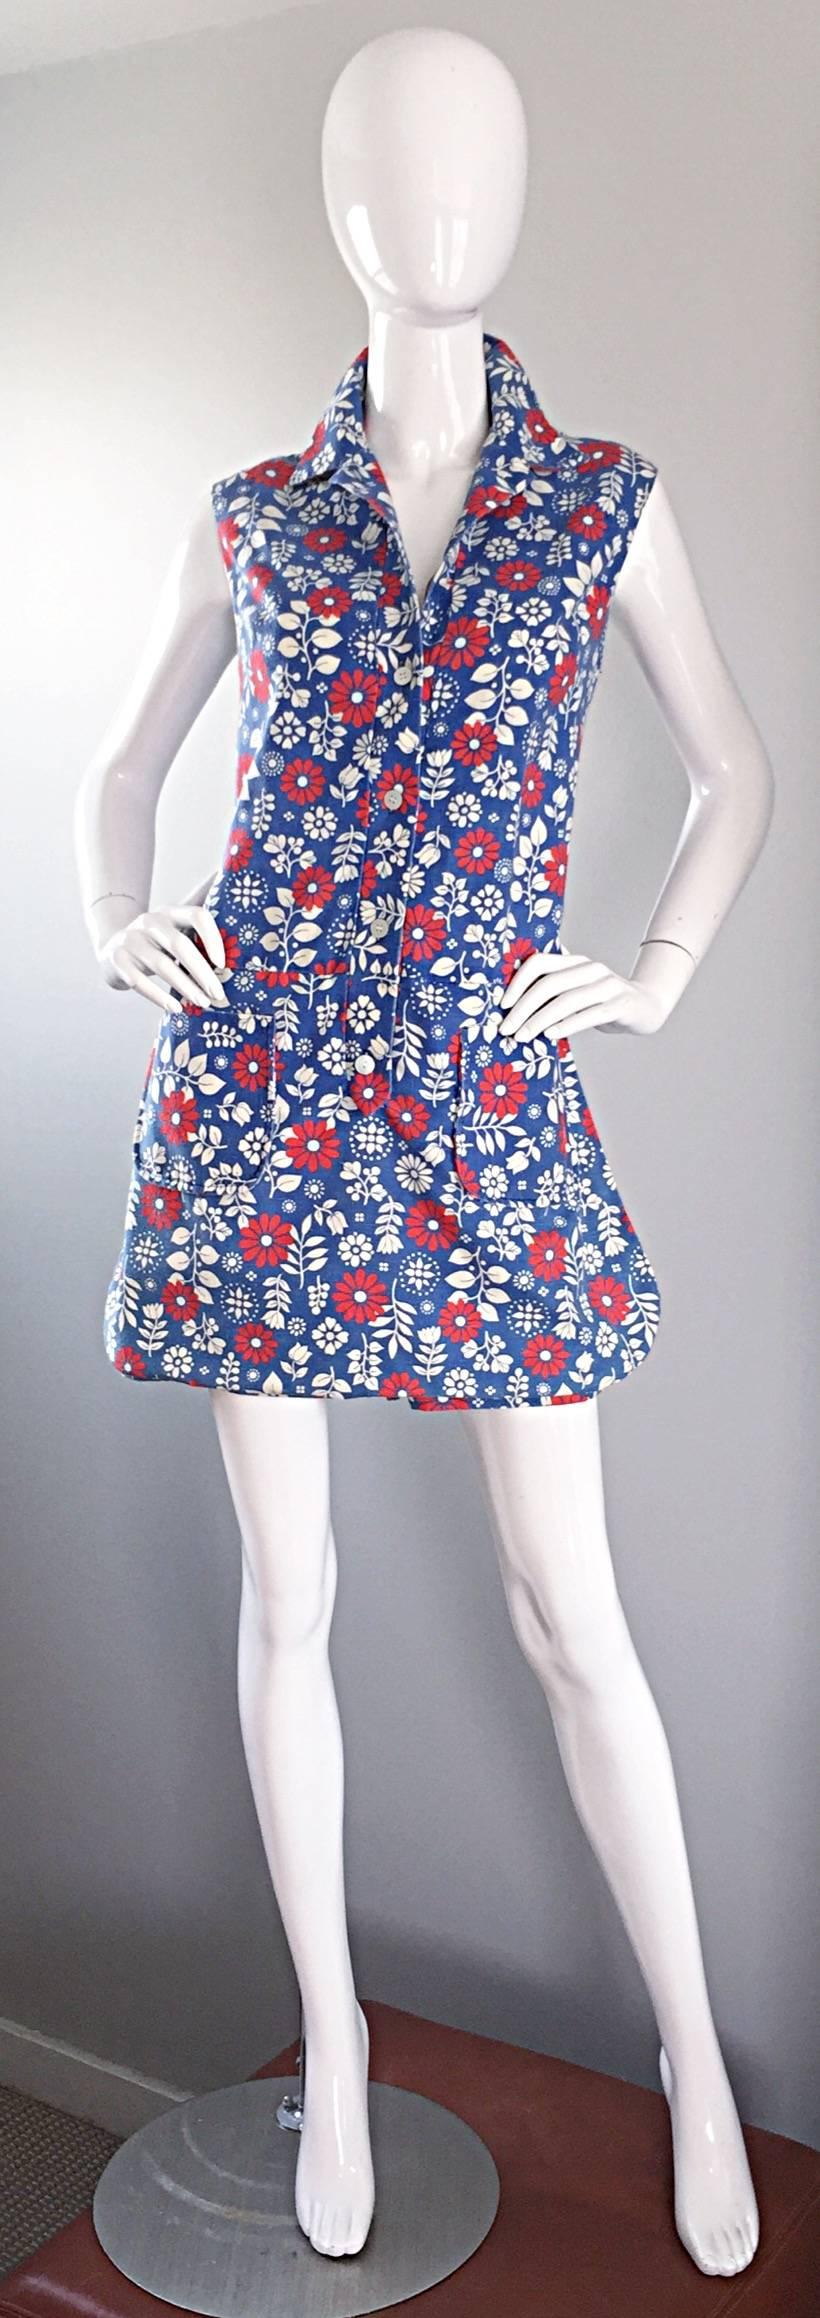 Rare and super adorable vintage 60s ABERCROMBIE & FITCH cotton romper / onesie / jumpsuit with attached skort! Buttons up the bodice. Cute red, white and blue printed flowers throughout. Looks so chic on! Great with sandals, flats, wedges or heels.